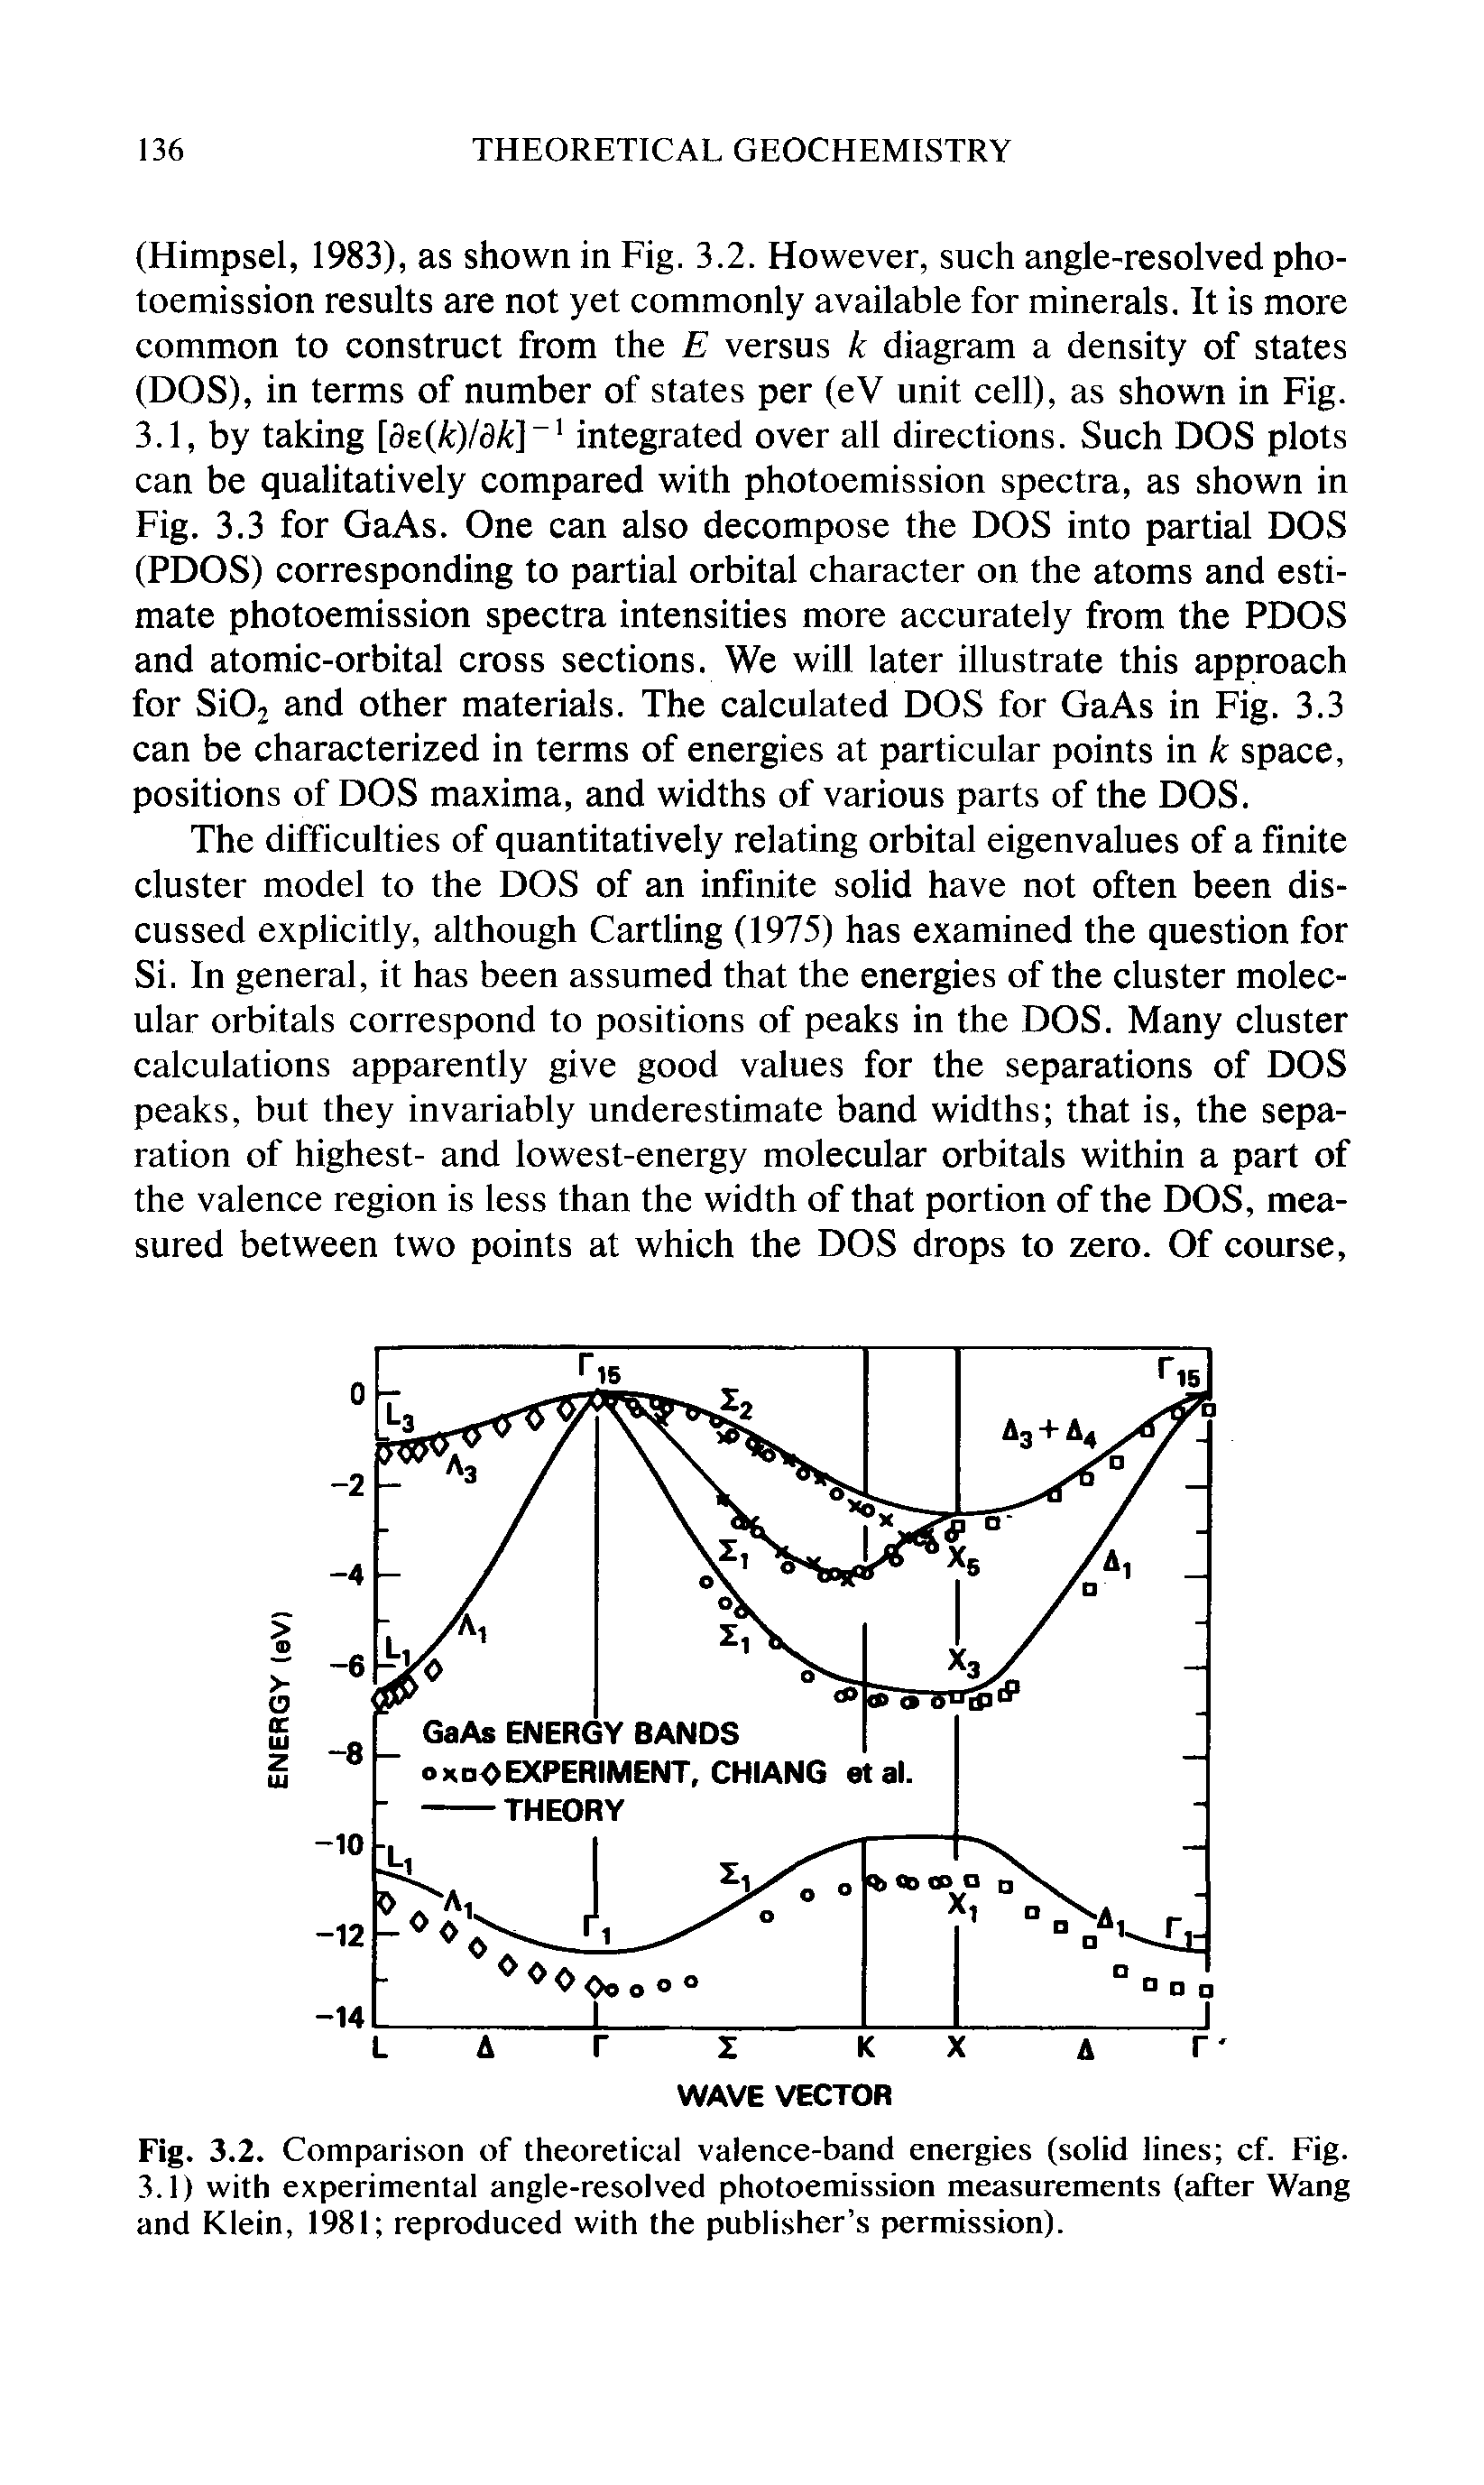 Fig. 3.2. Comparison of theoretical valence-band energies (solid lines cf. Fig. 3.1) with experimental angle-resolved photoemission measurements (after Wang and Klein, 1981 reproduced with the publisher s permission).